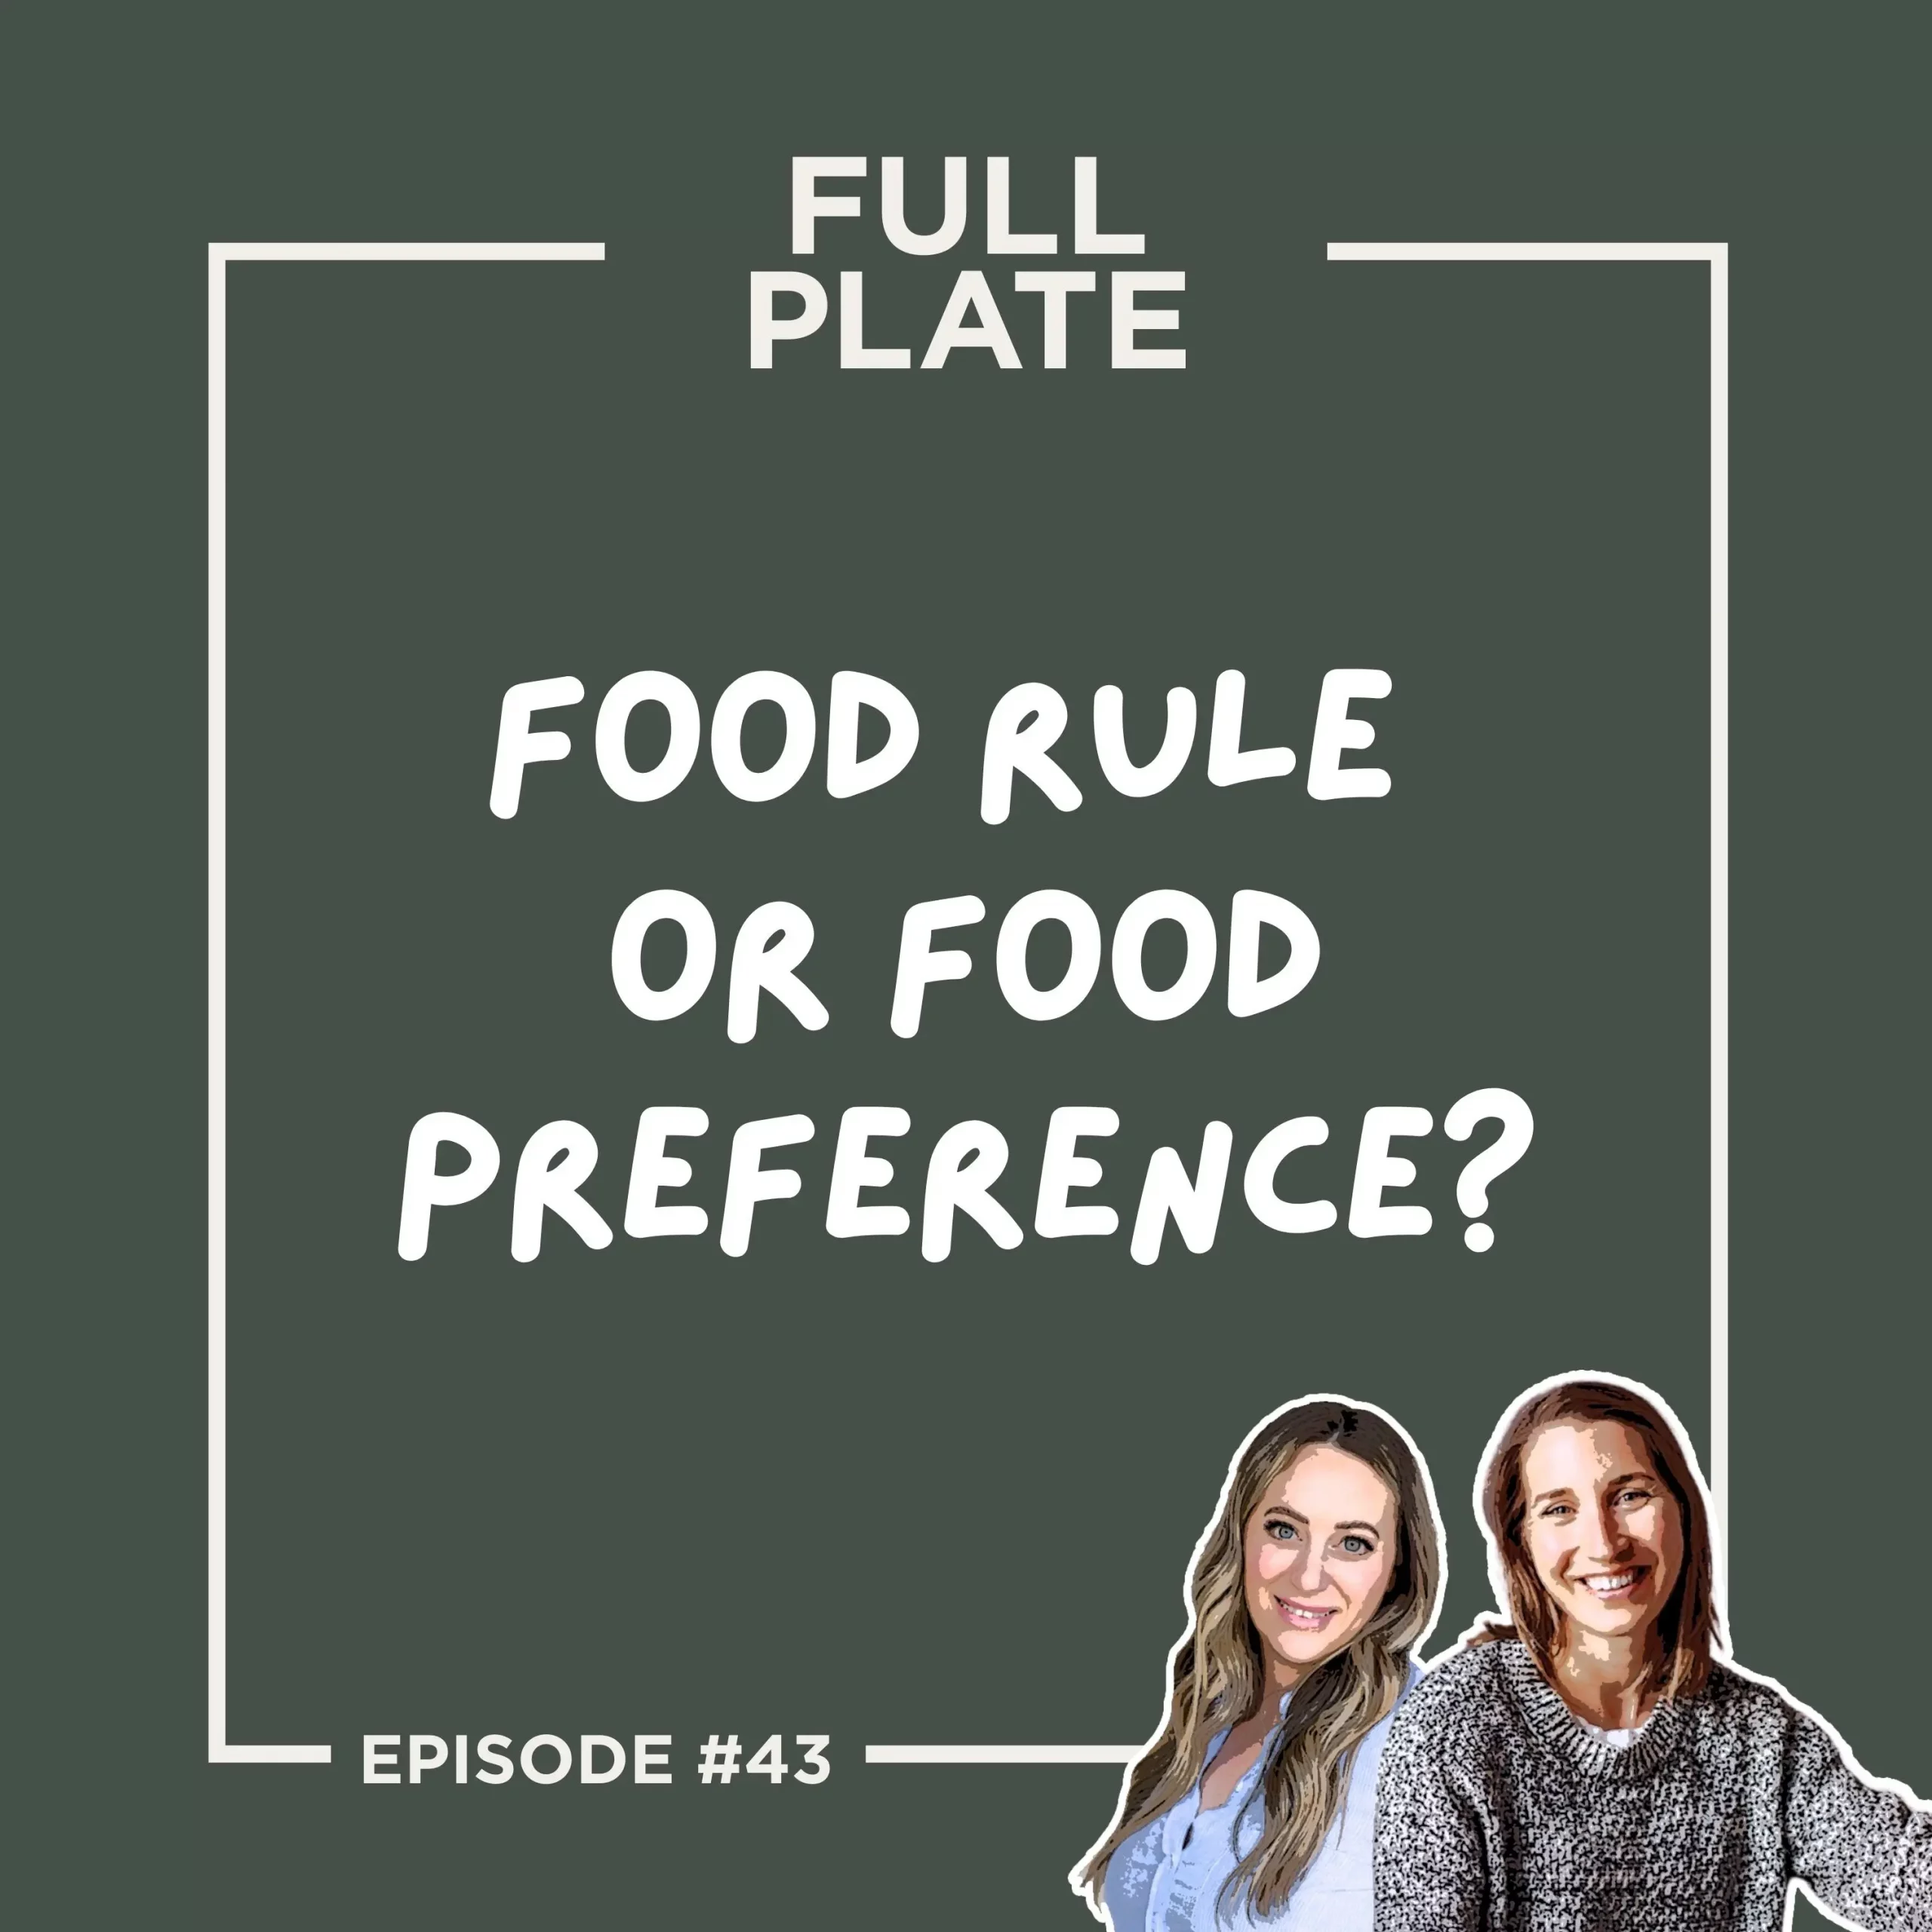 Full Plate Podcast | Ditch diet culture, respect your body, and set boundaries | Episode 43: Food Rule or Food Preference?